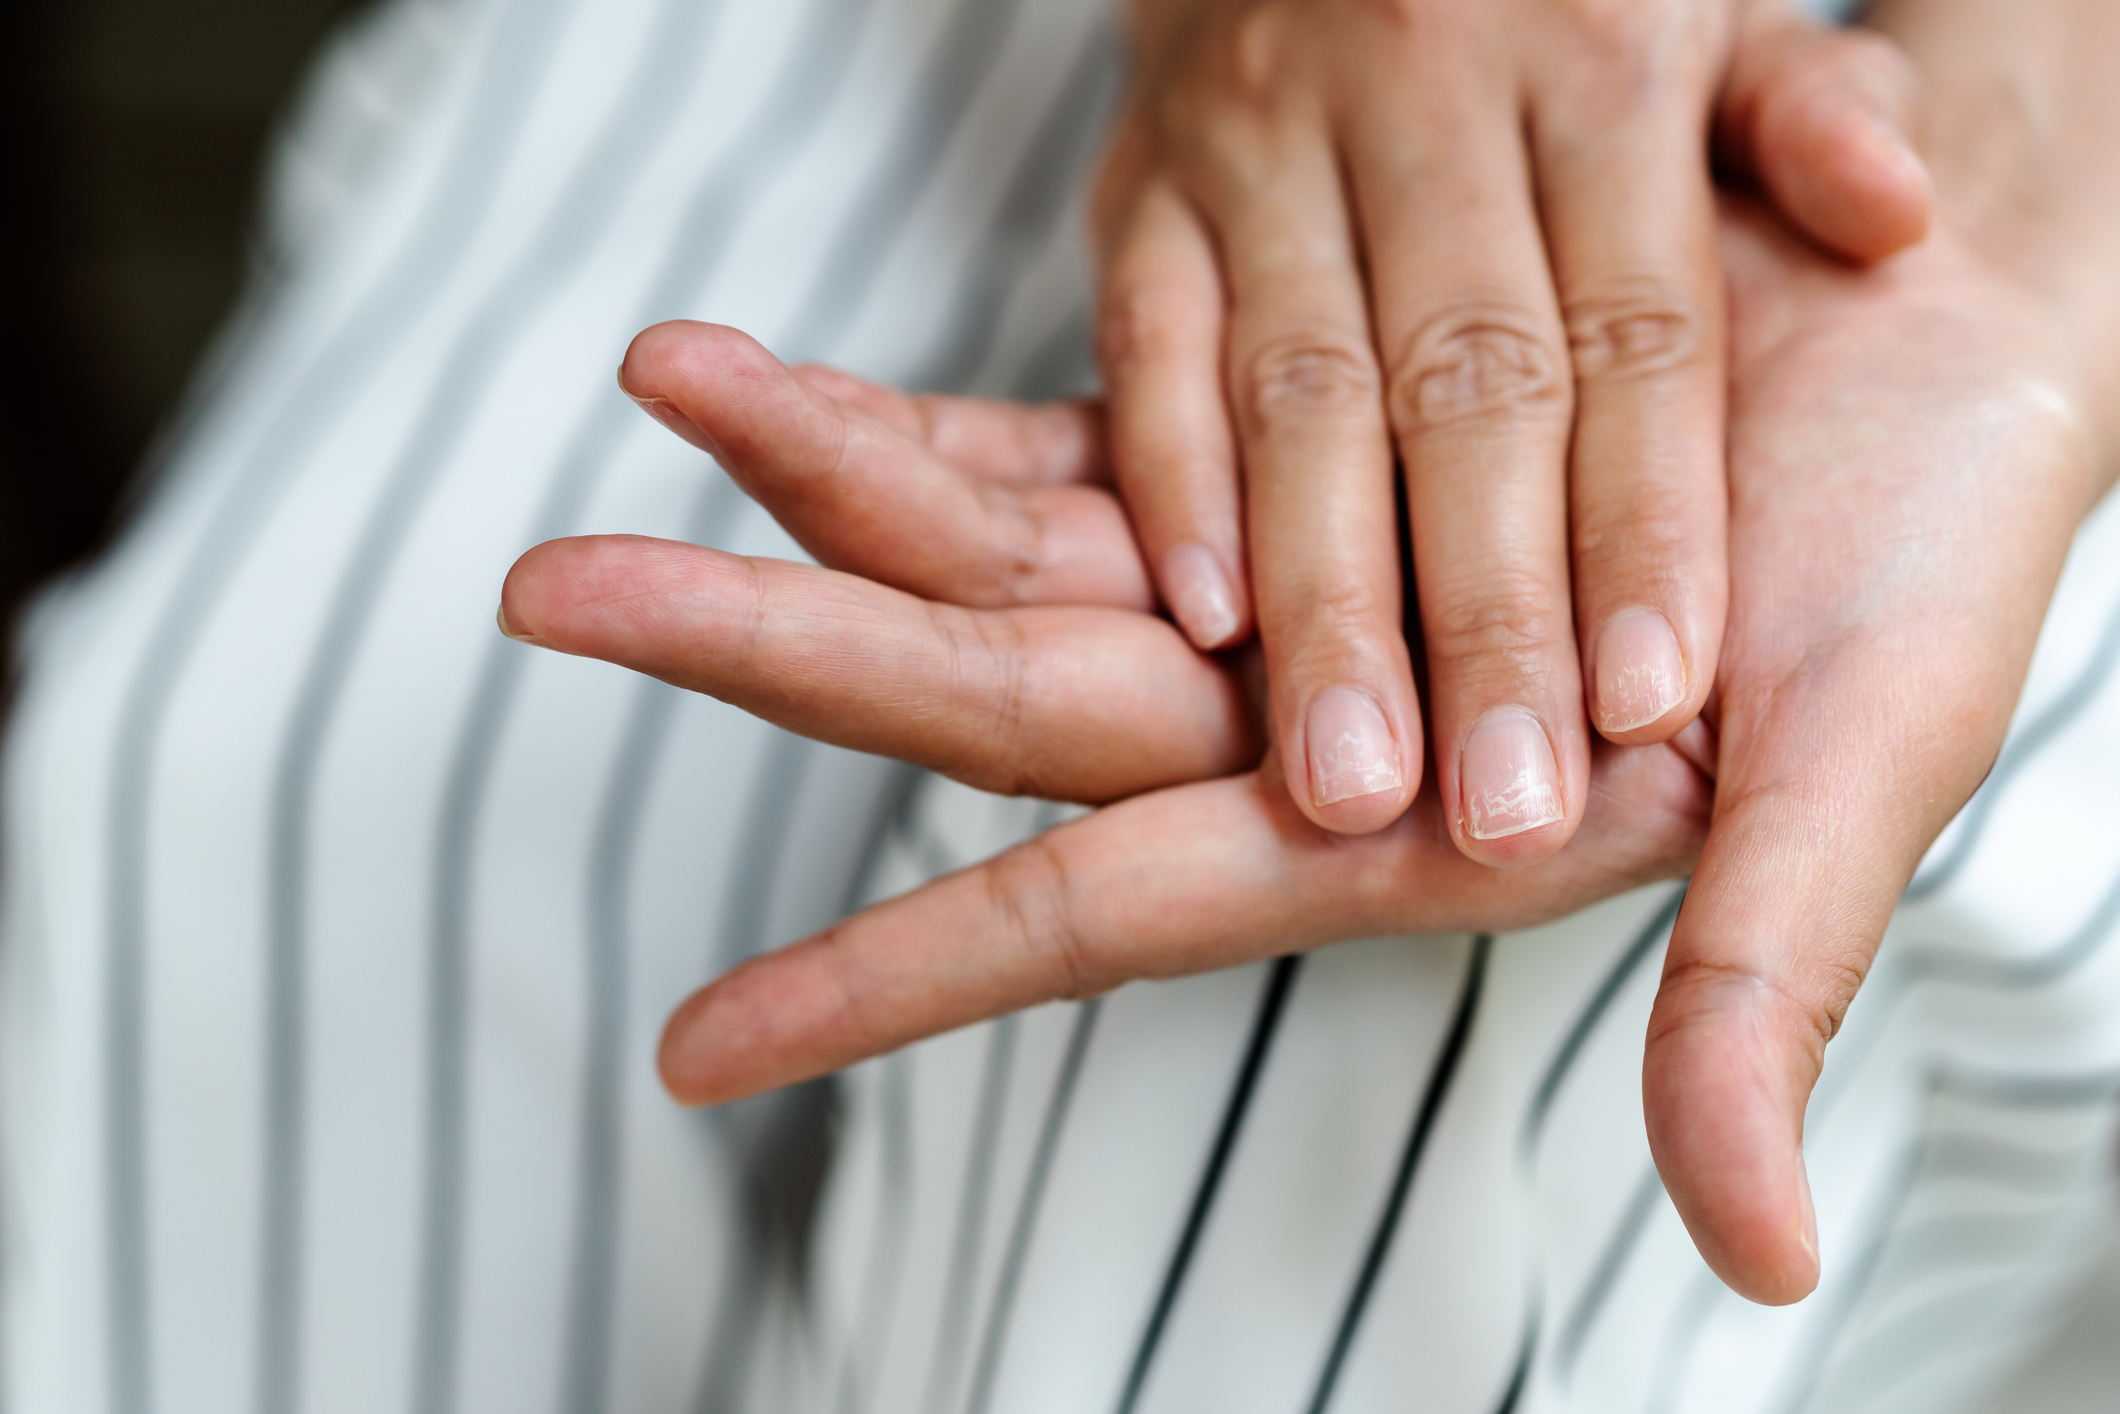 A close-up of a person gently placing their hand over another person&#x27;s hand, both hands showing natural nails